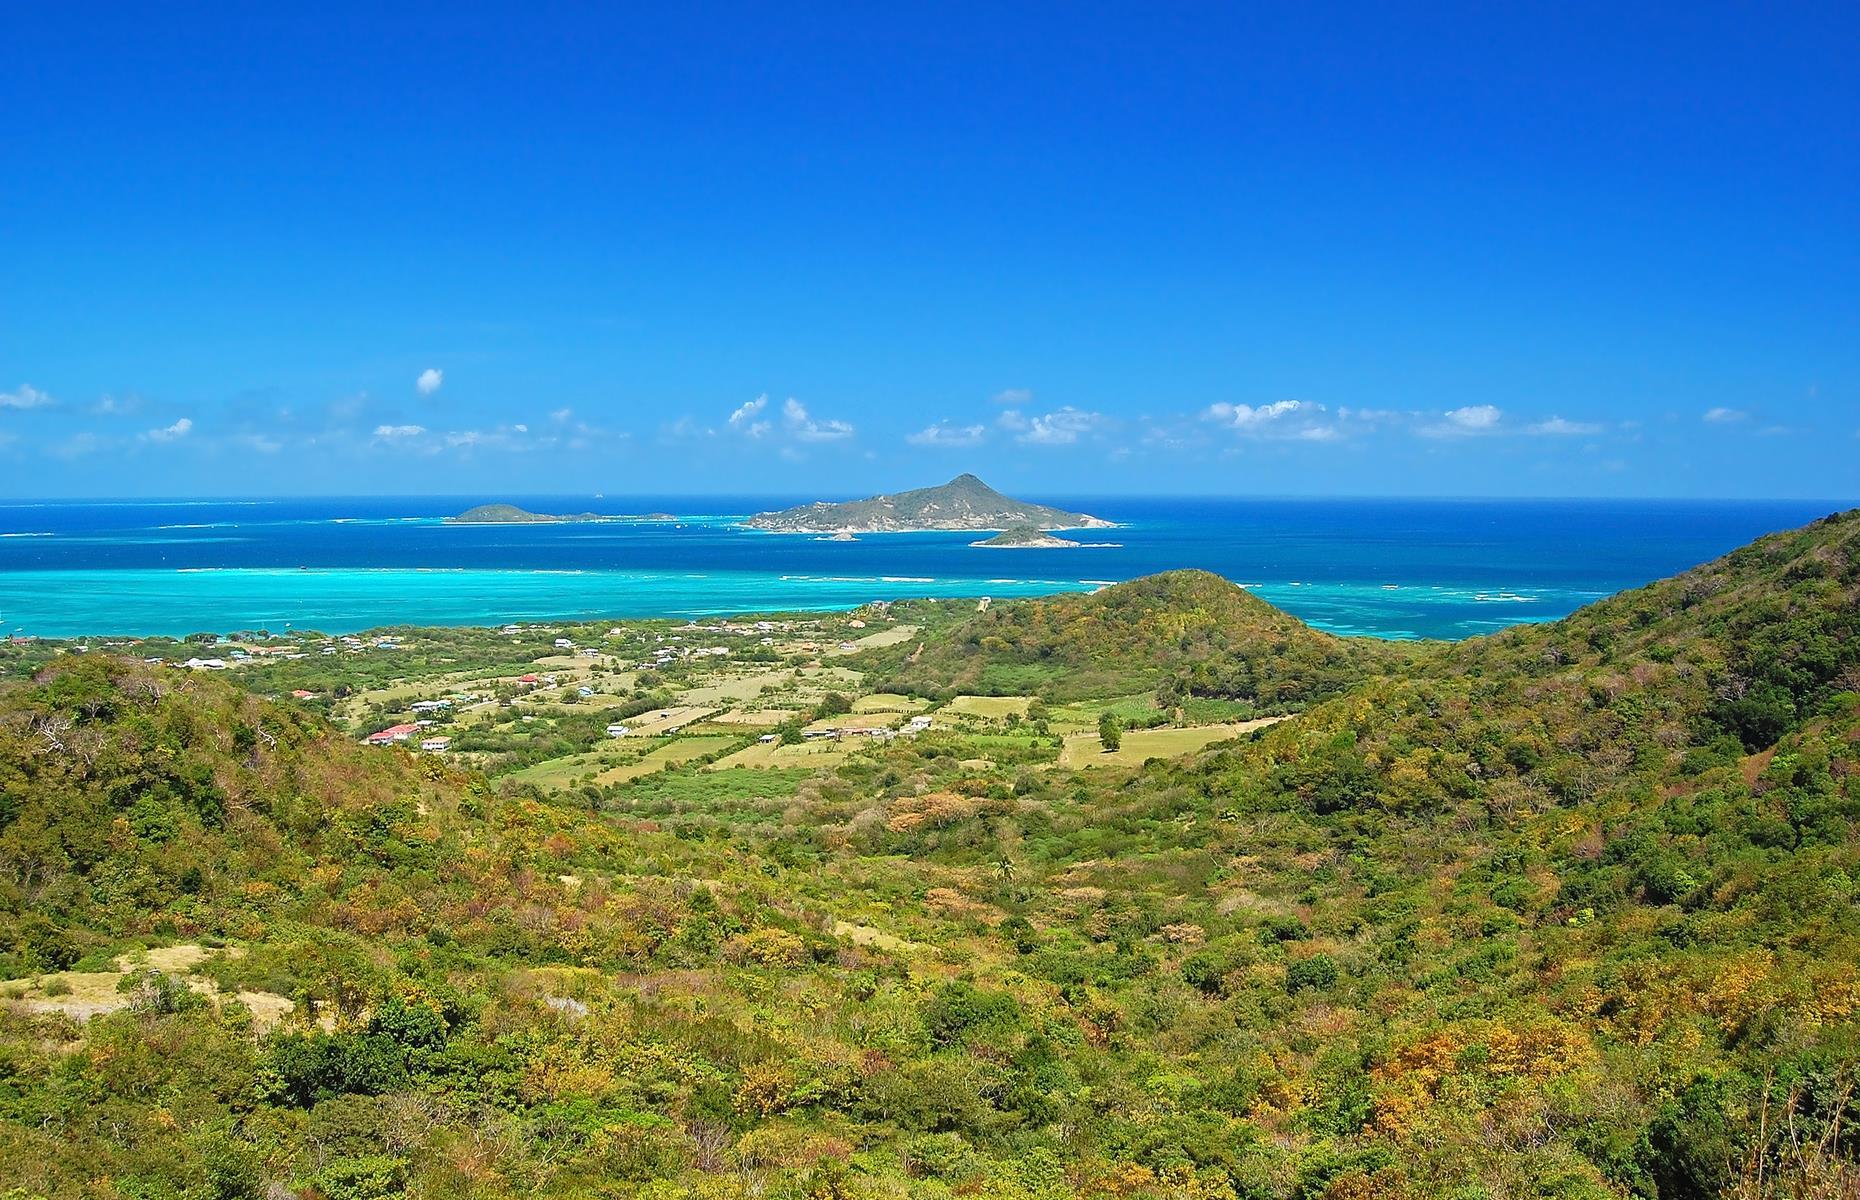 For a taste of the sleepy and unspoiled Caribbean of old, look no further than this pretty little isle. Part of the southern Grenadines, Carriacou belongs to the nation of Grenada along with Petite Martinique. Home to around 9,000 people, it’s all sandy bays and wooded hills – an ideal place to escape, unwind and switch off. Aside from the slight bustle of the main town of Hillsborough, the island is refreshingly crowd-free.